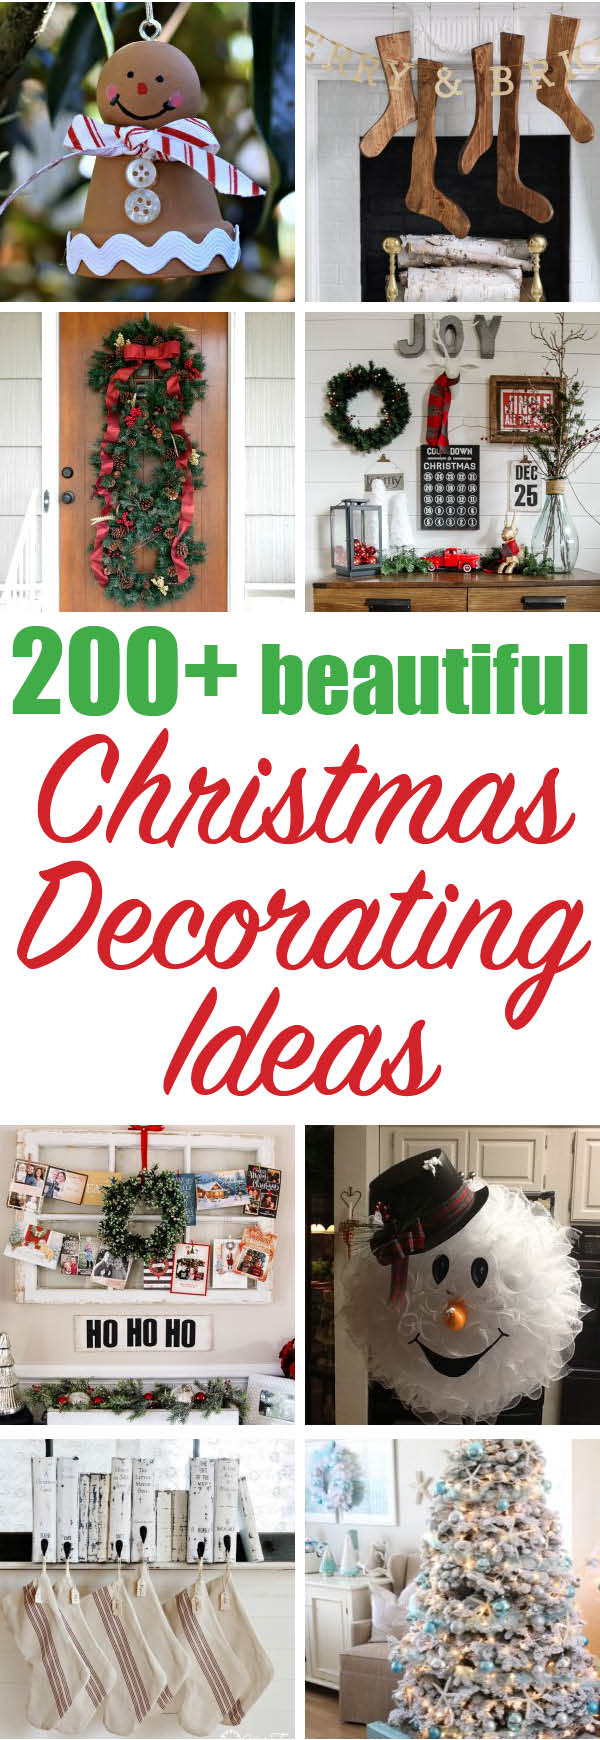 Hundreds of beautiful Christmas Decorating Ideas - some of the BEST Christmas decorating ideas.... and I want to do so many of them. With ornaments and mantels and trees and signs - oh how many great ways to DIY Christmas decorating. I've never seen a lot of these ideas, so the inspiration is endless!